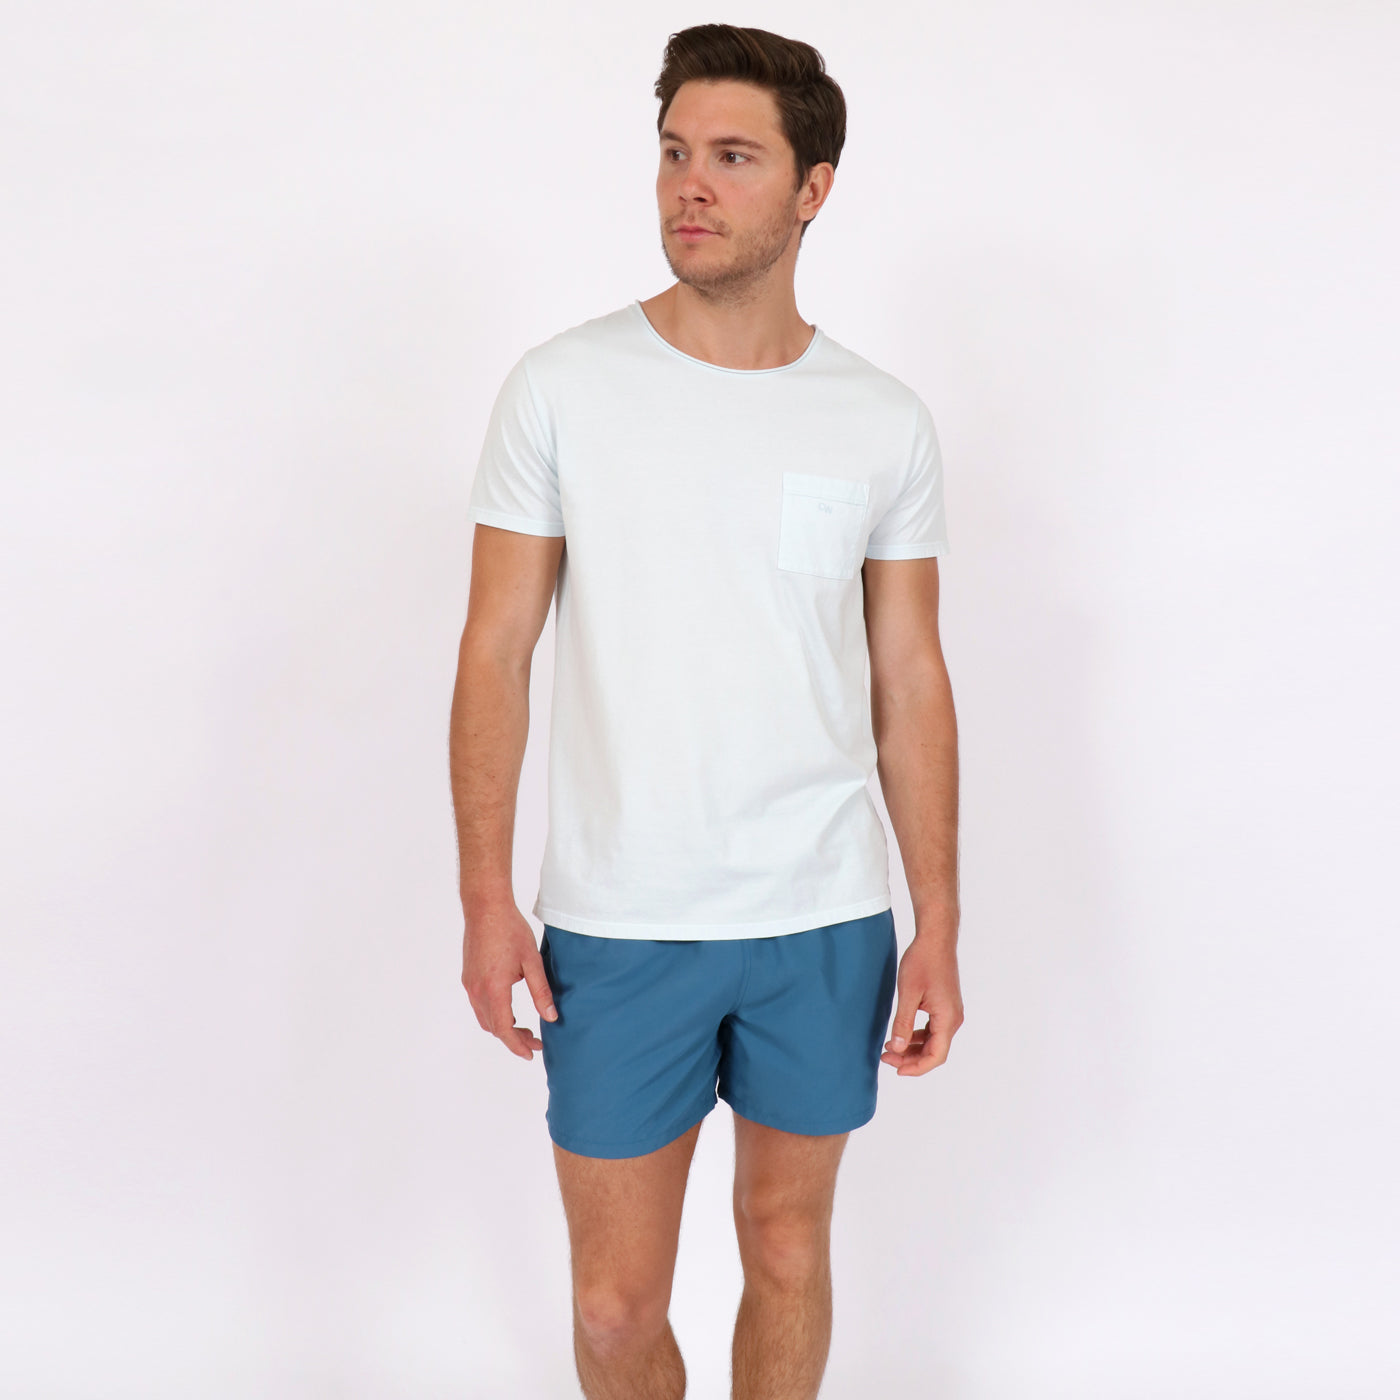 OWTS1804 Ice Blue garment dyed beach fit men's organic cotton t-shirt with chest pocket detail styled with OWSS1801 Aegean blue men's recycled polyester swim short